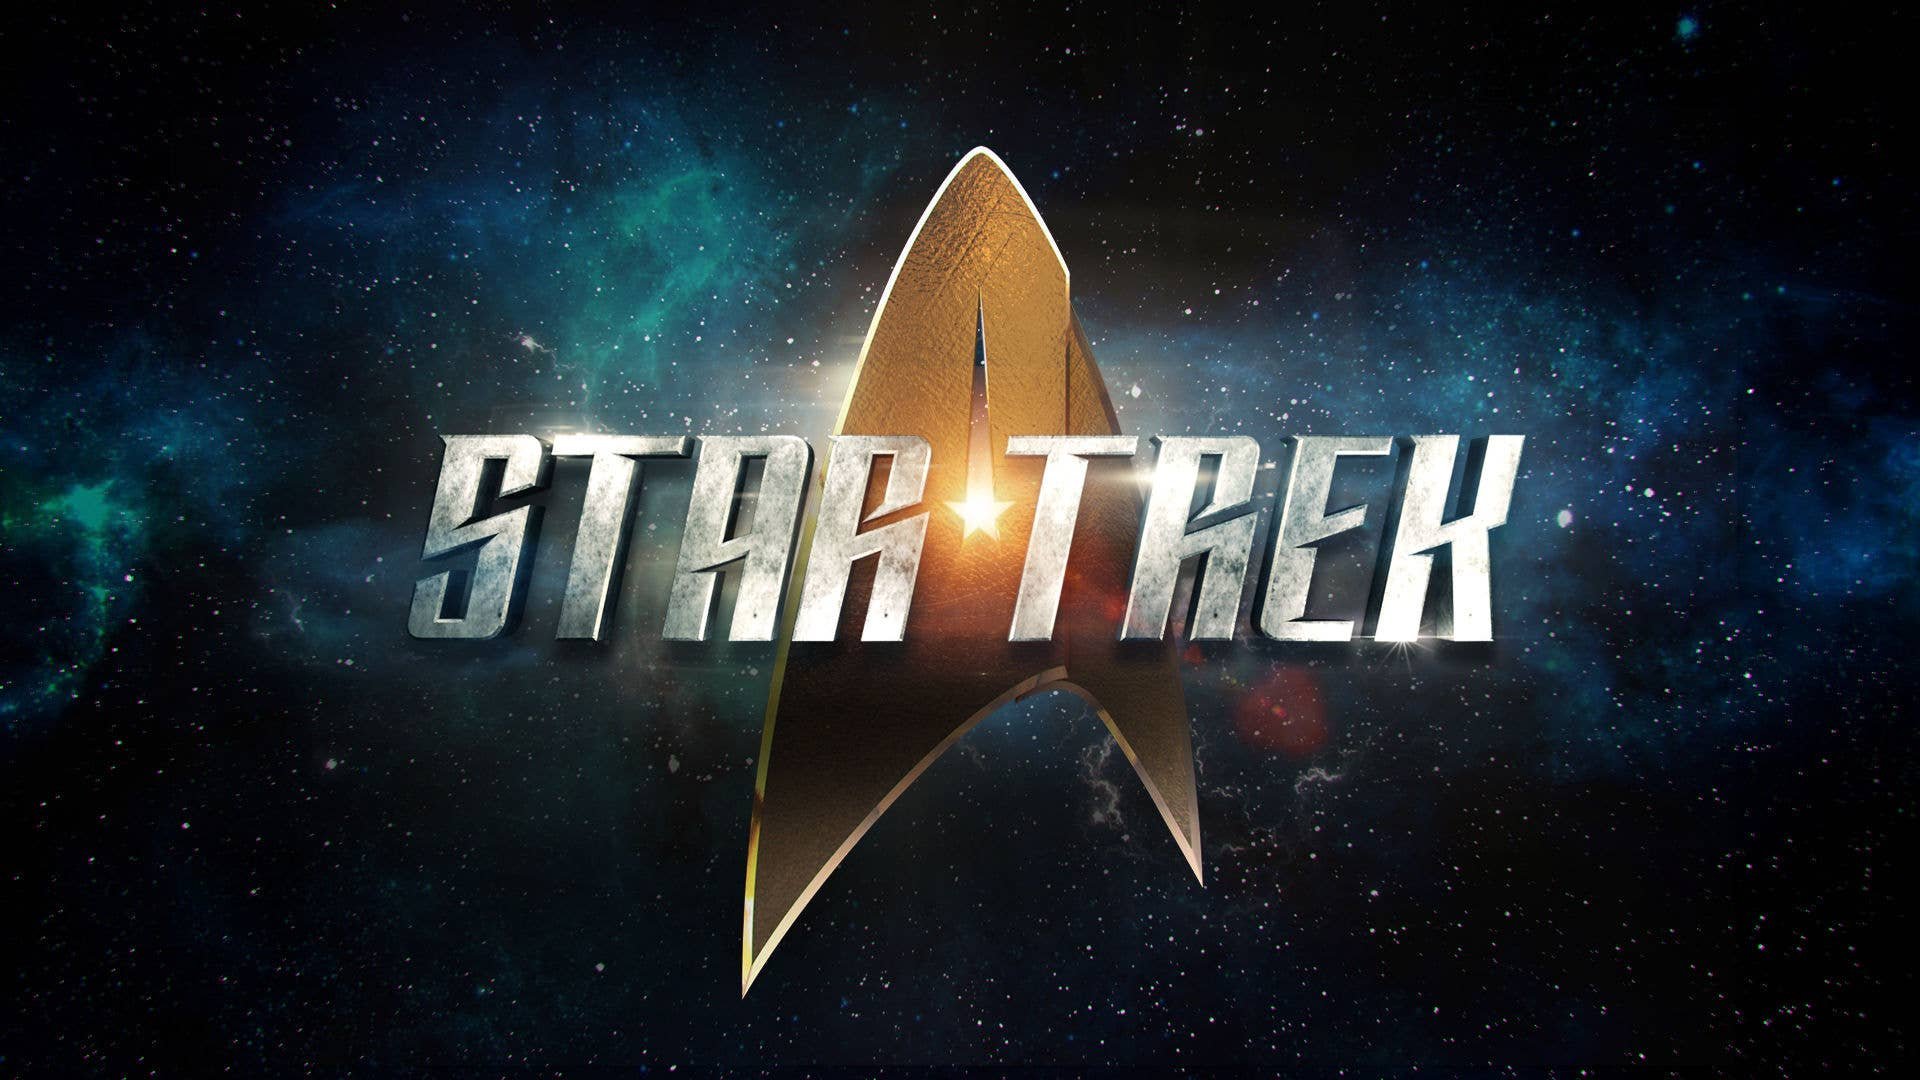 Exclusive: JJ Abrams’s Star Trek Getting Spinoff Shows